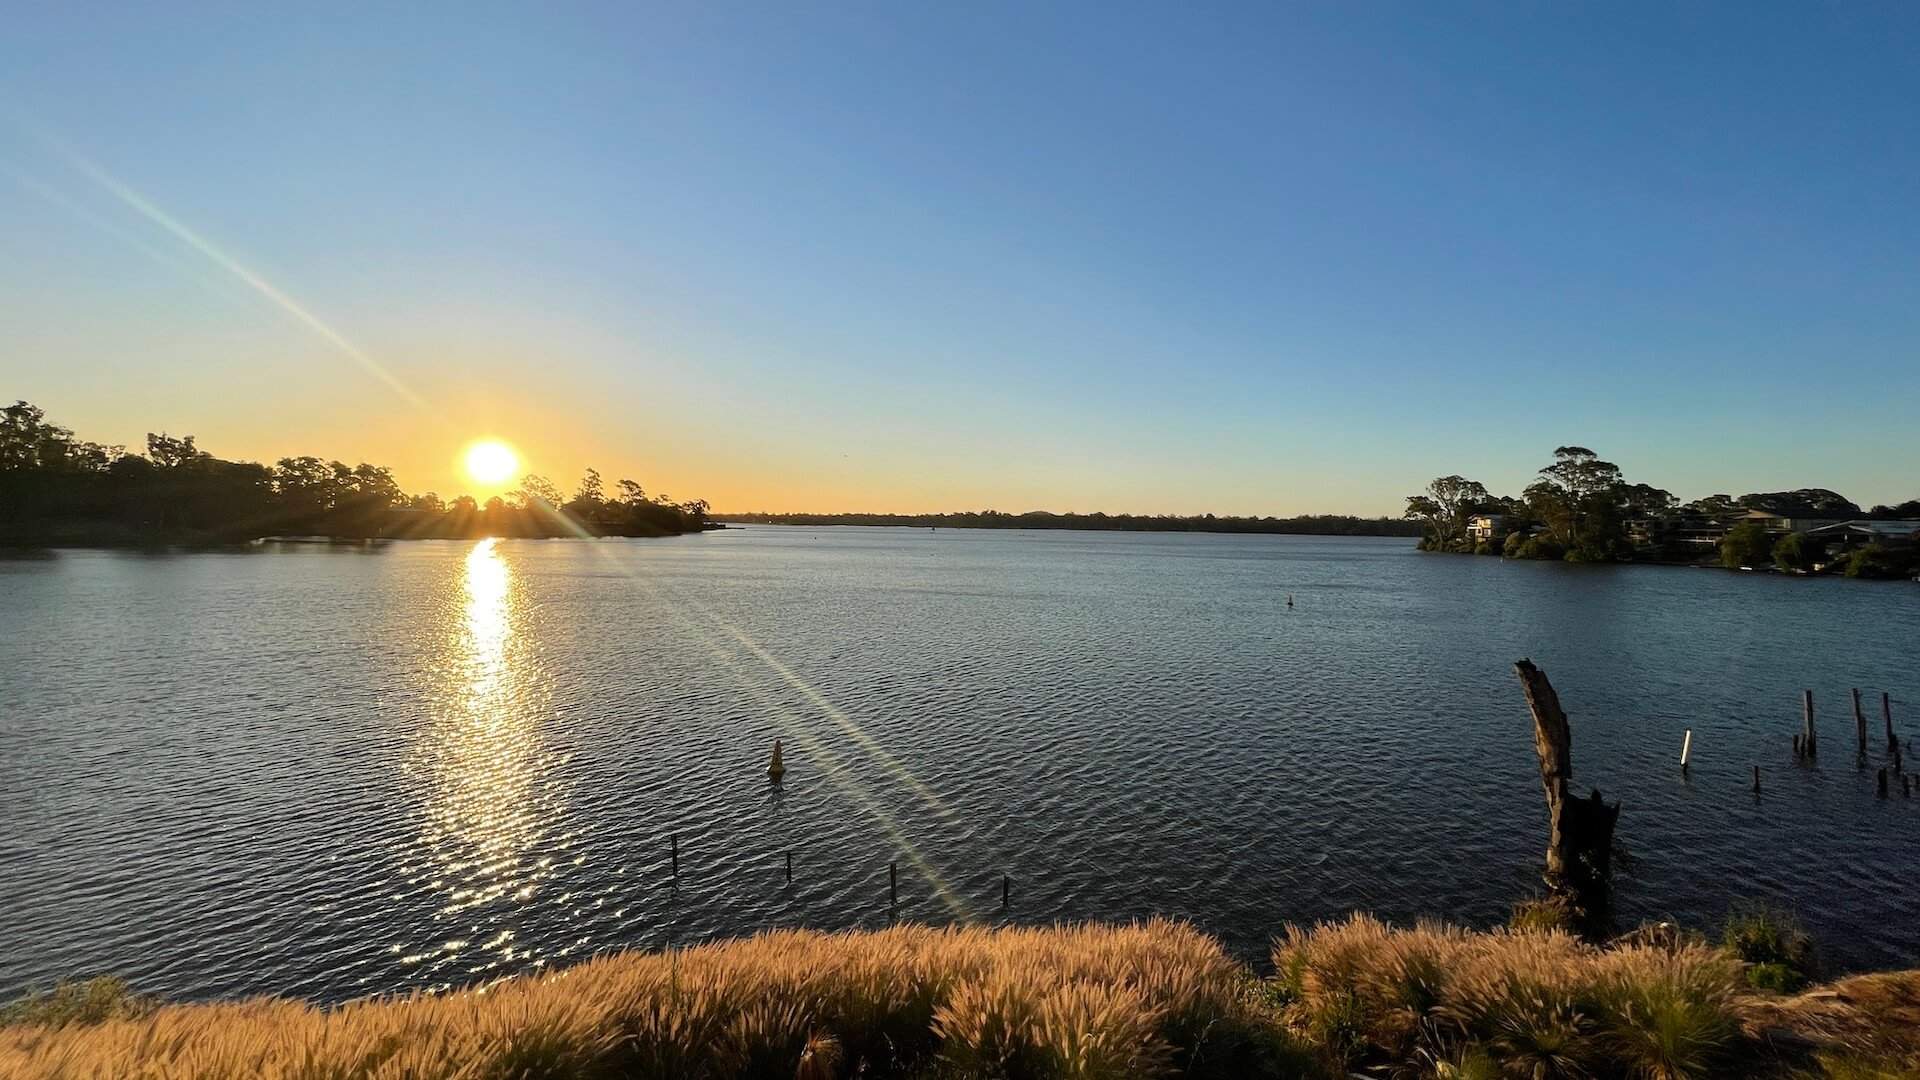 Lake Nagambie - one of the best places to canoe and kayak near Melbourne